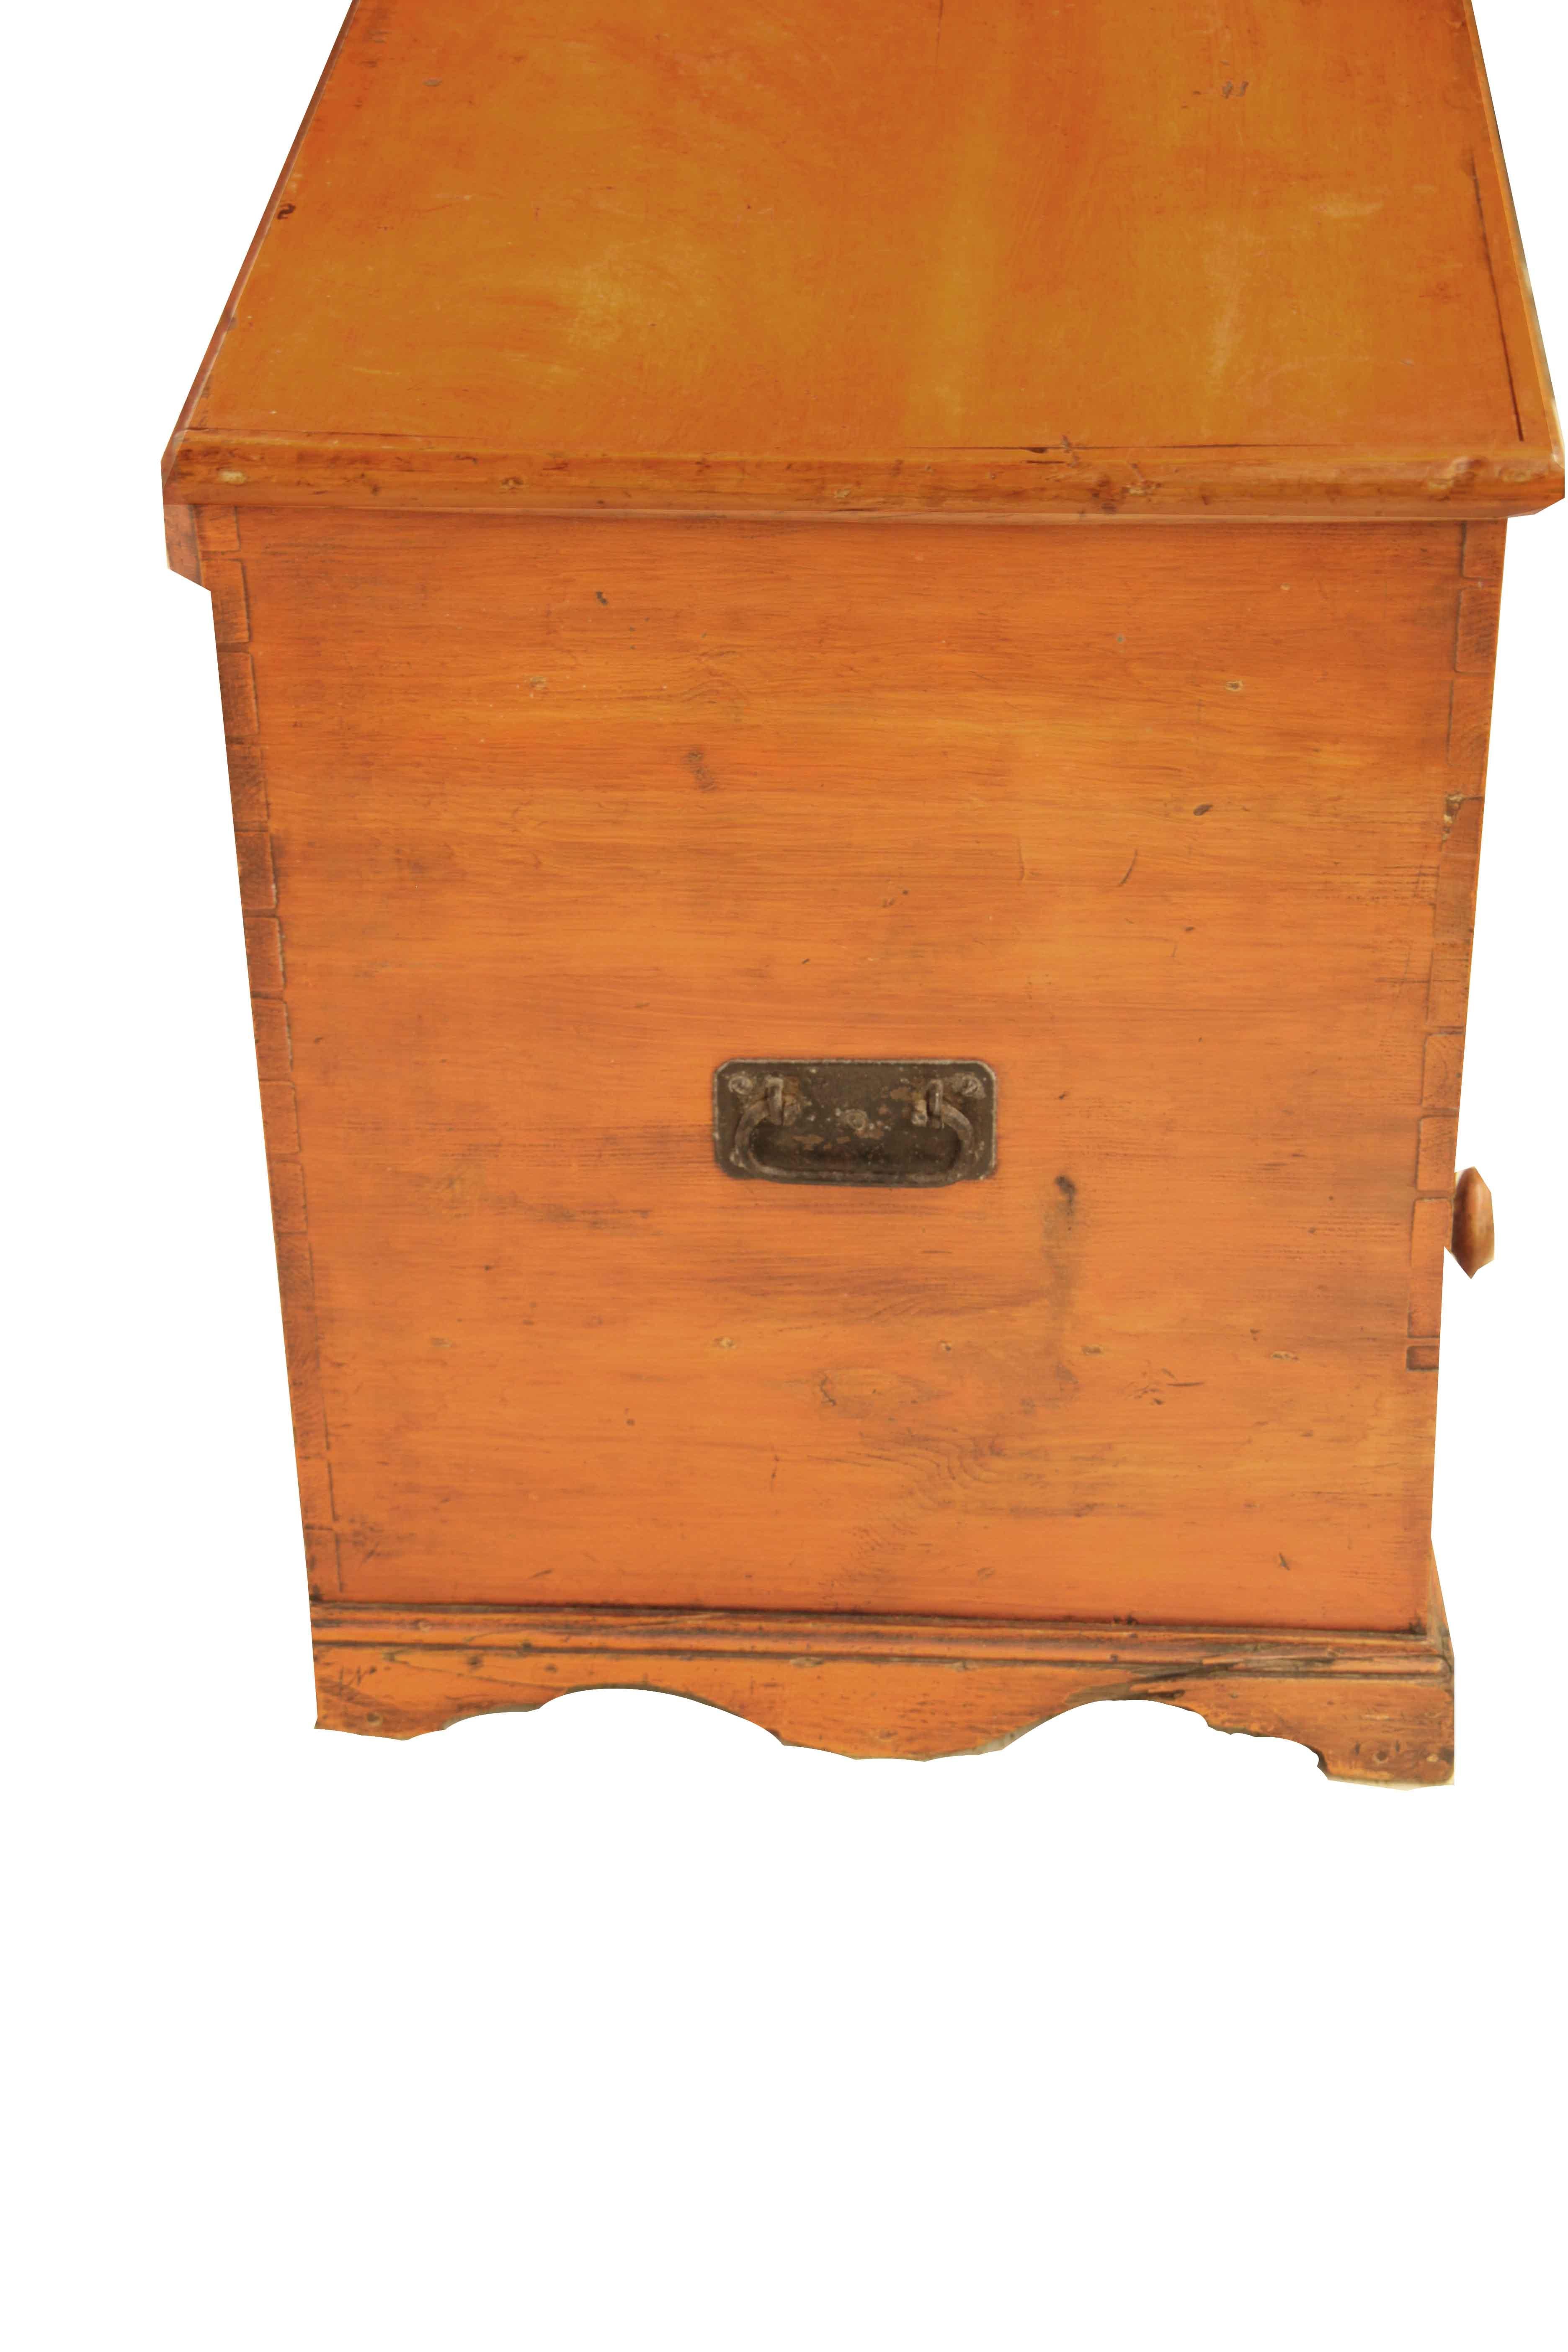 English painted blanket chest, this chest features a beautiful salmon color with a swirl graining effect on the front(see photo). The interior and drawer are lined with paper, the under side of the top also is papered with individual verses from